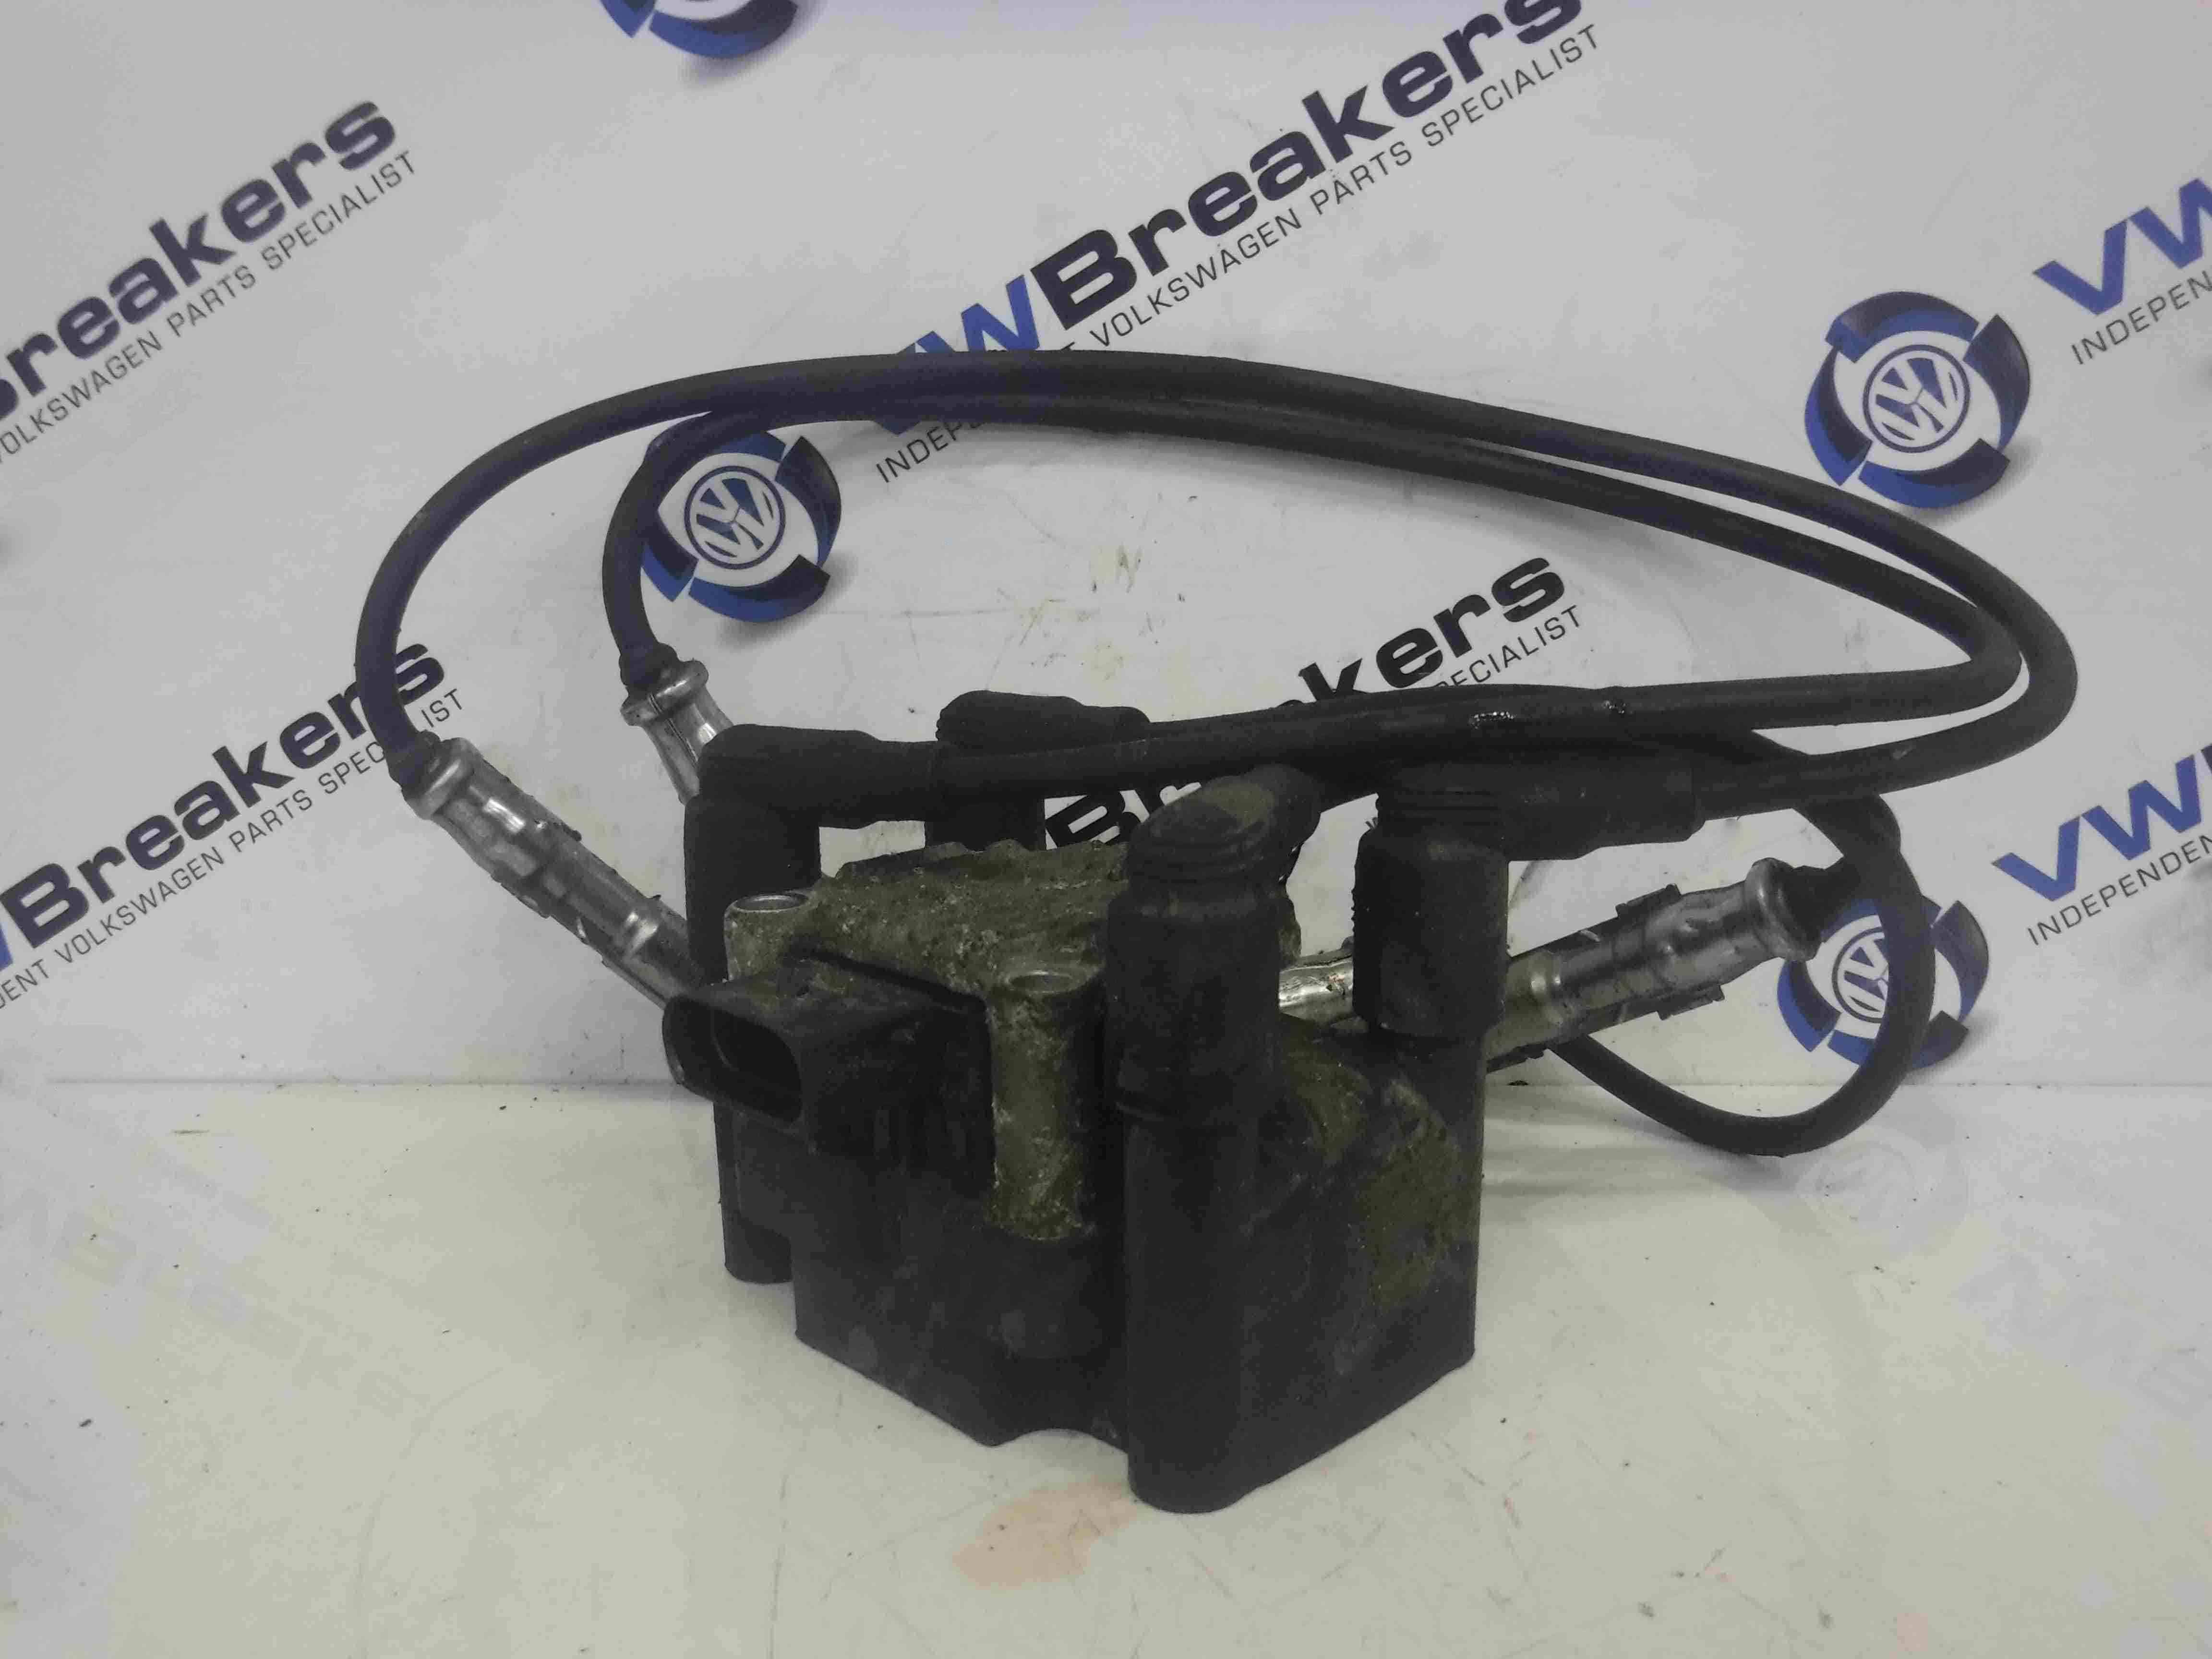 Volkswagen Polo 1999-2003 6N2 1.6 1.4 8v Ignition Coil Pack + Leads 032905106B